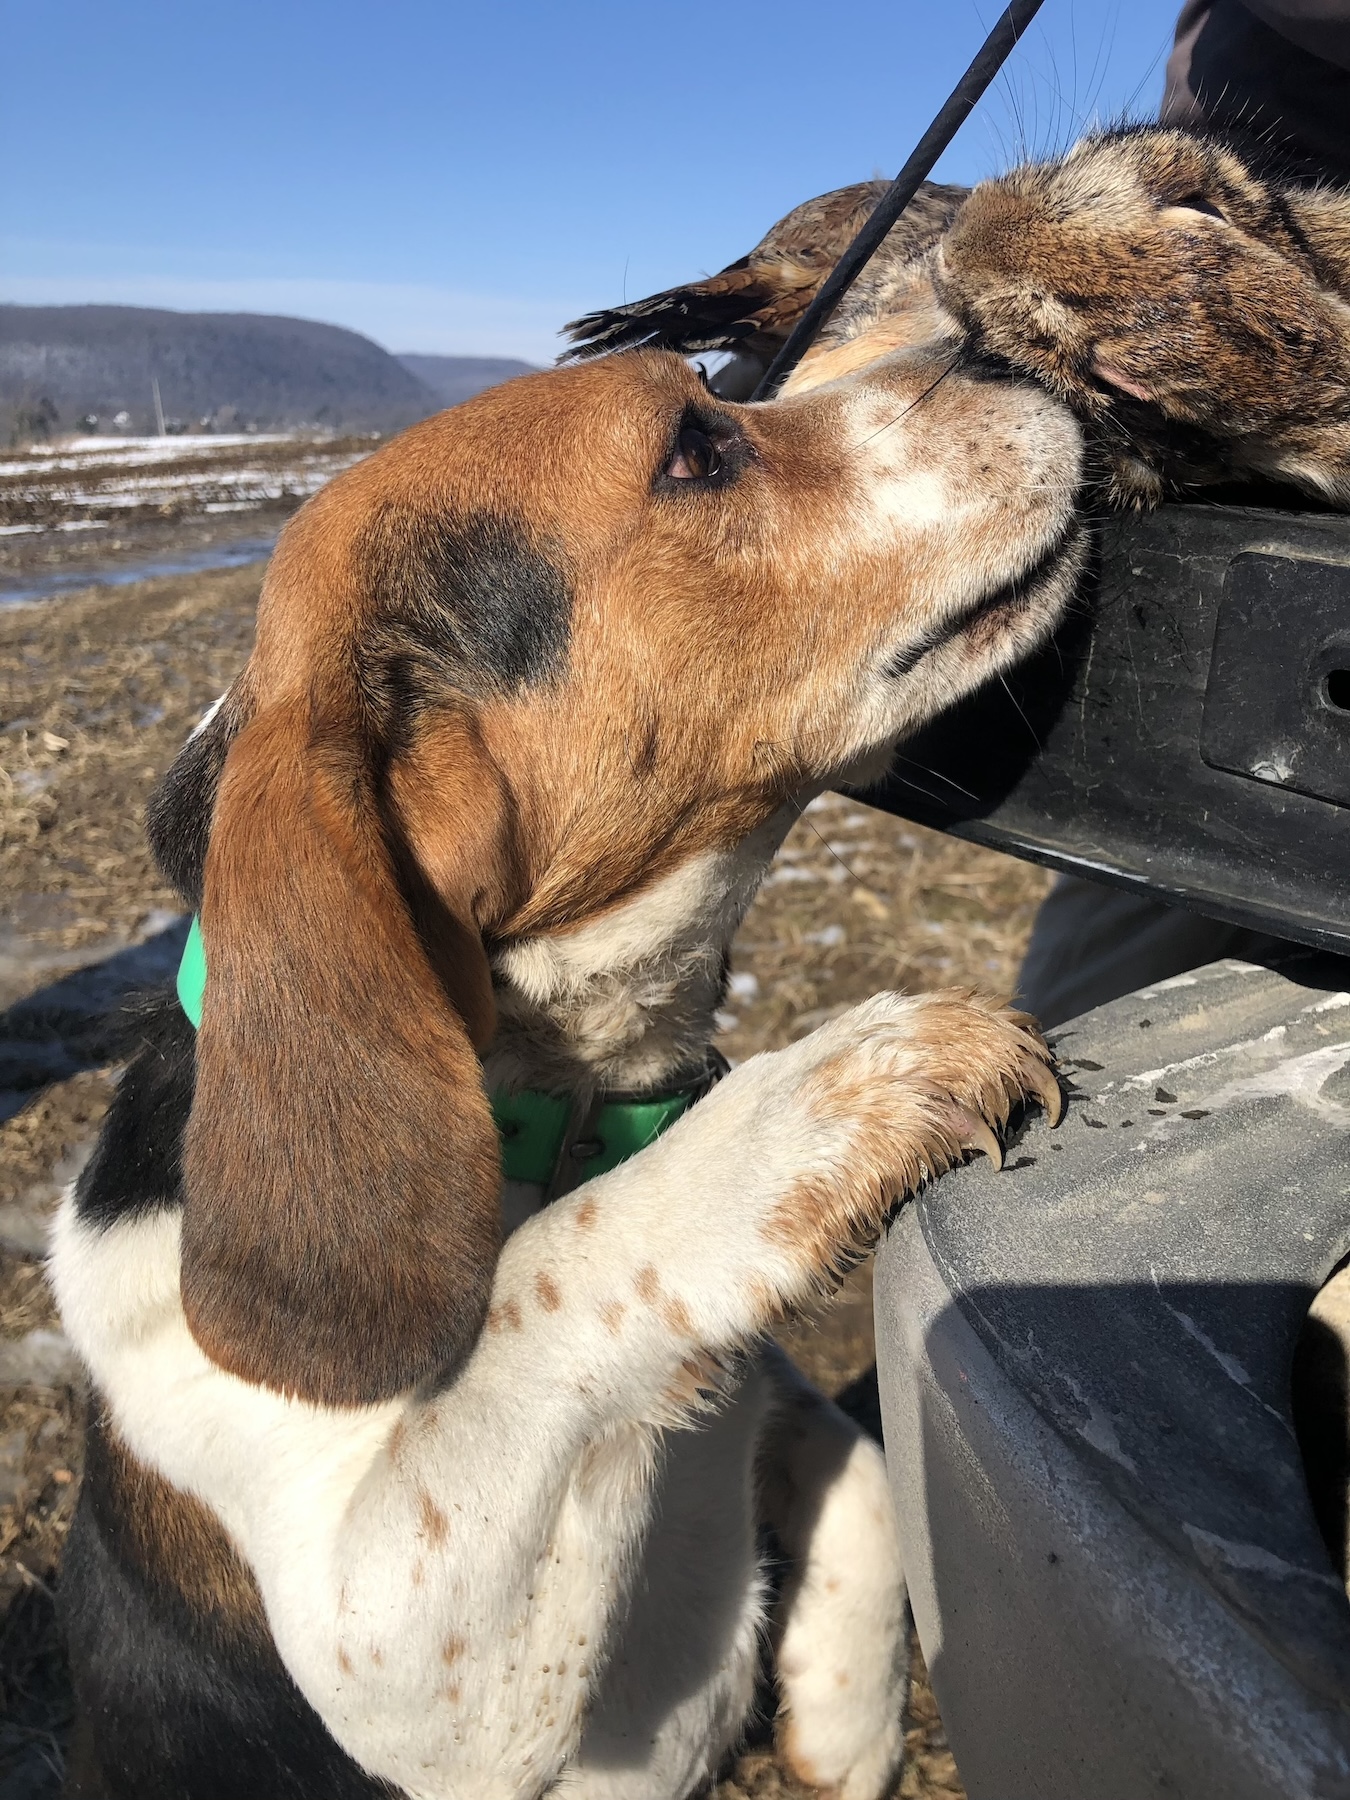 A beagle is one of the most popular hunting dogs for rabbits